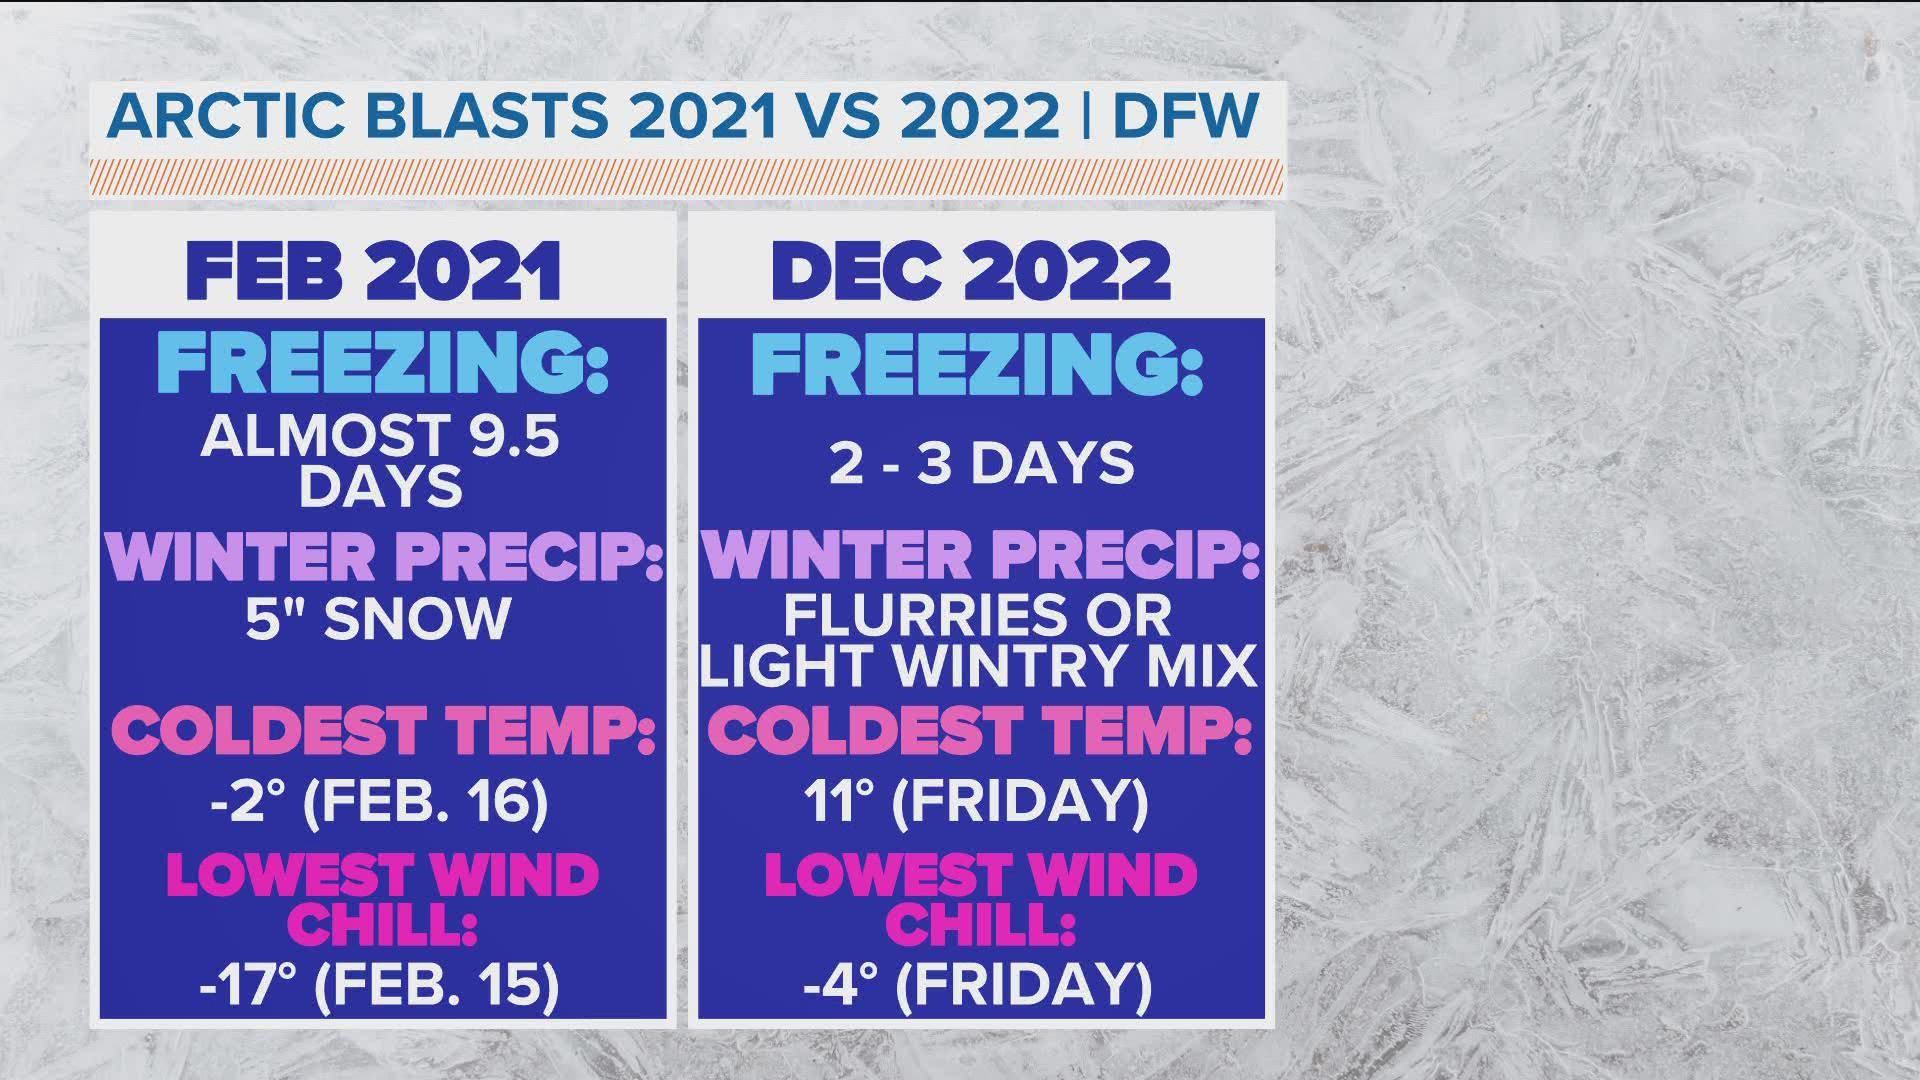 While you should prepare for this Thursday's cold temps, it's not expected to be as similar to what we experienced in February 2021.